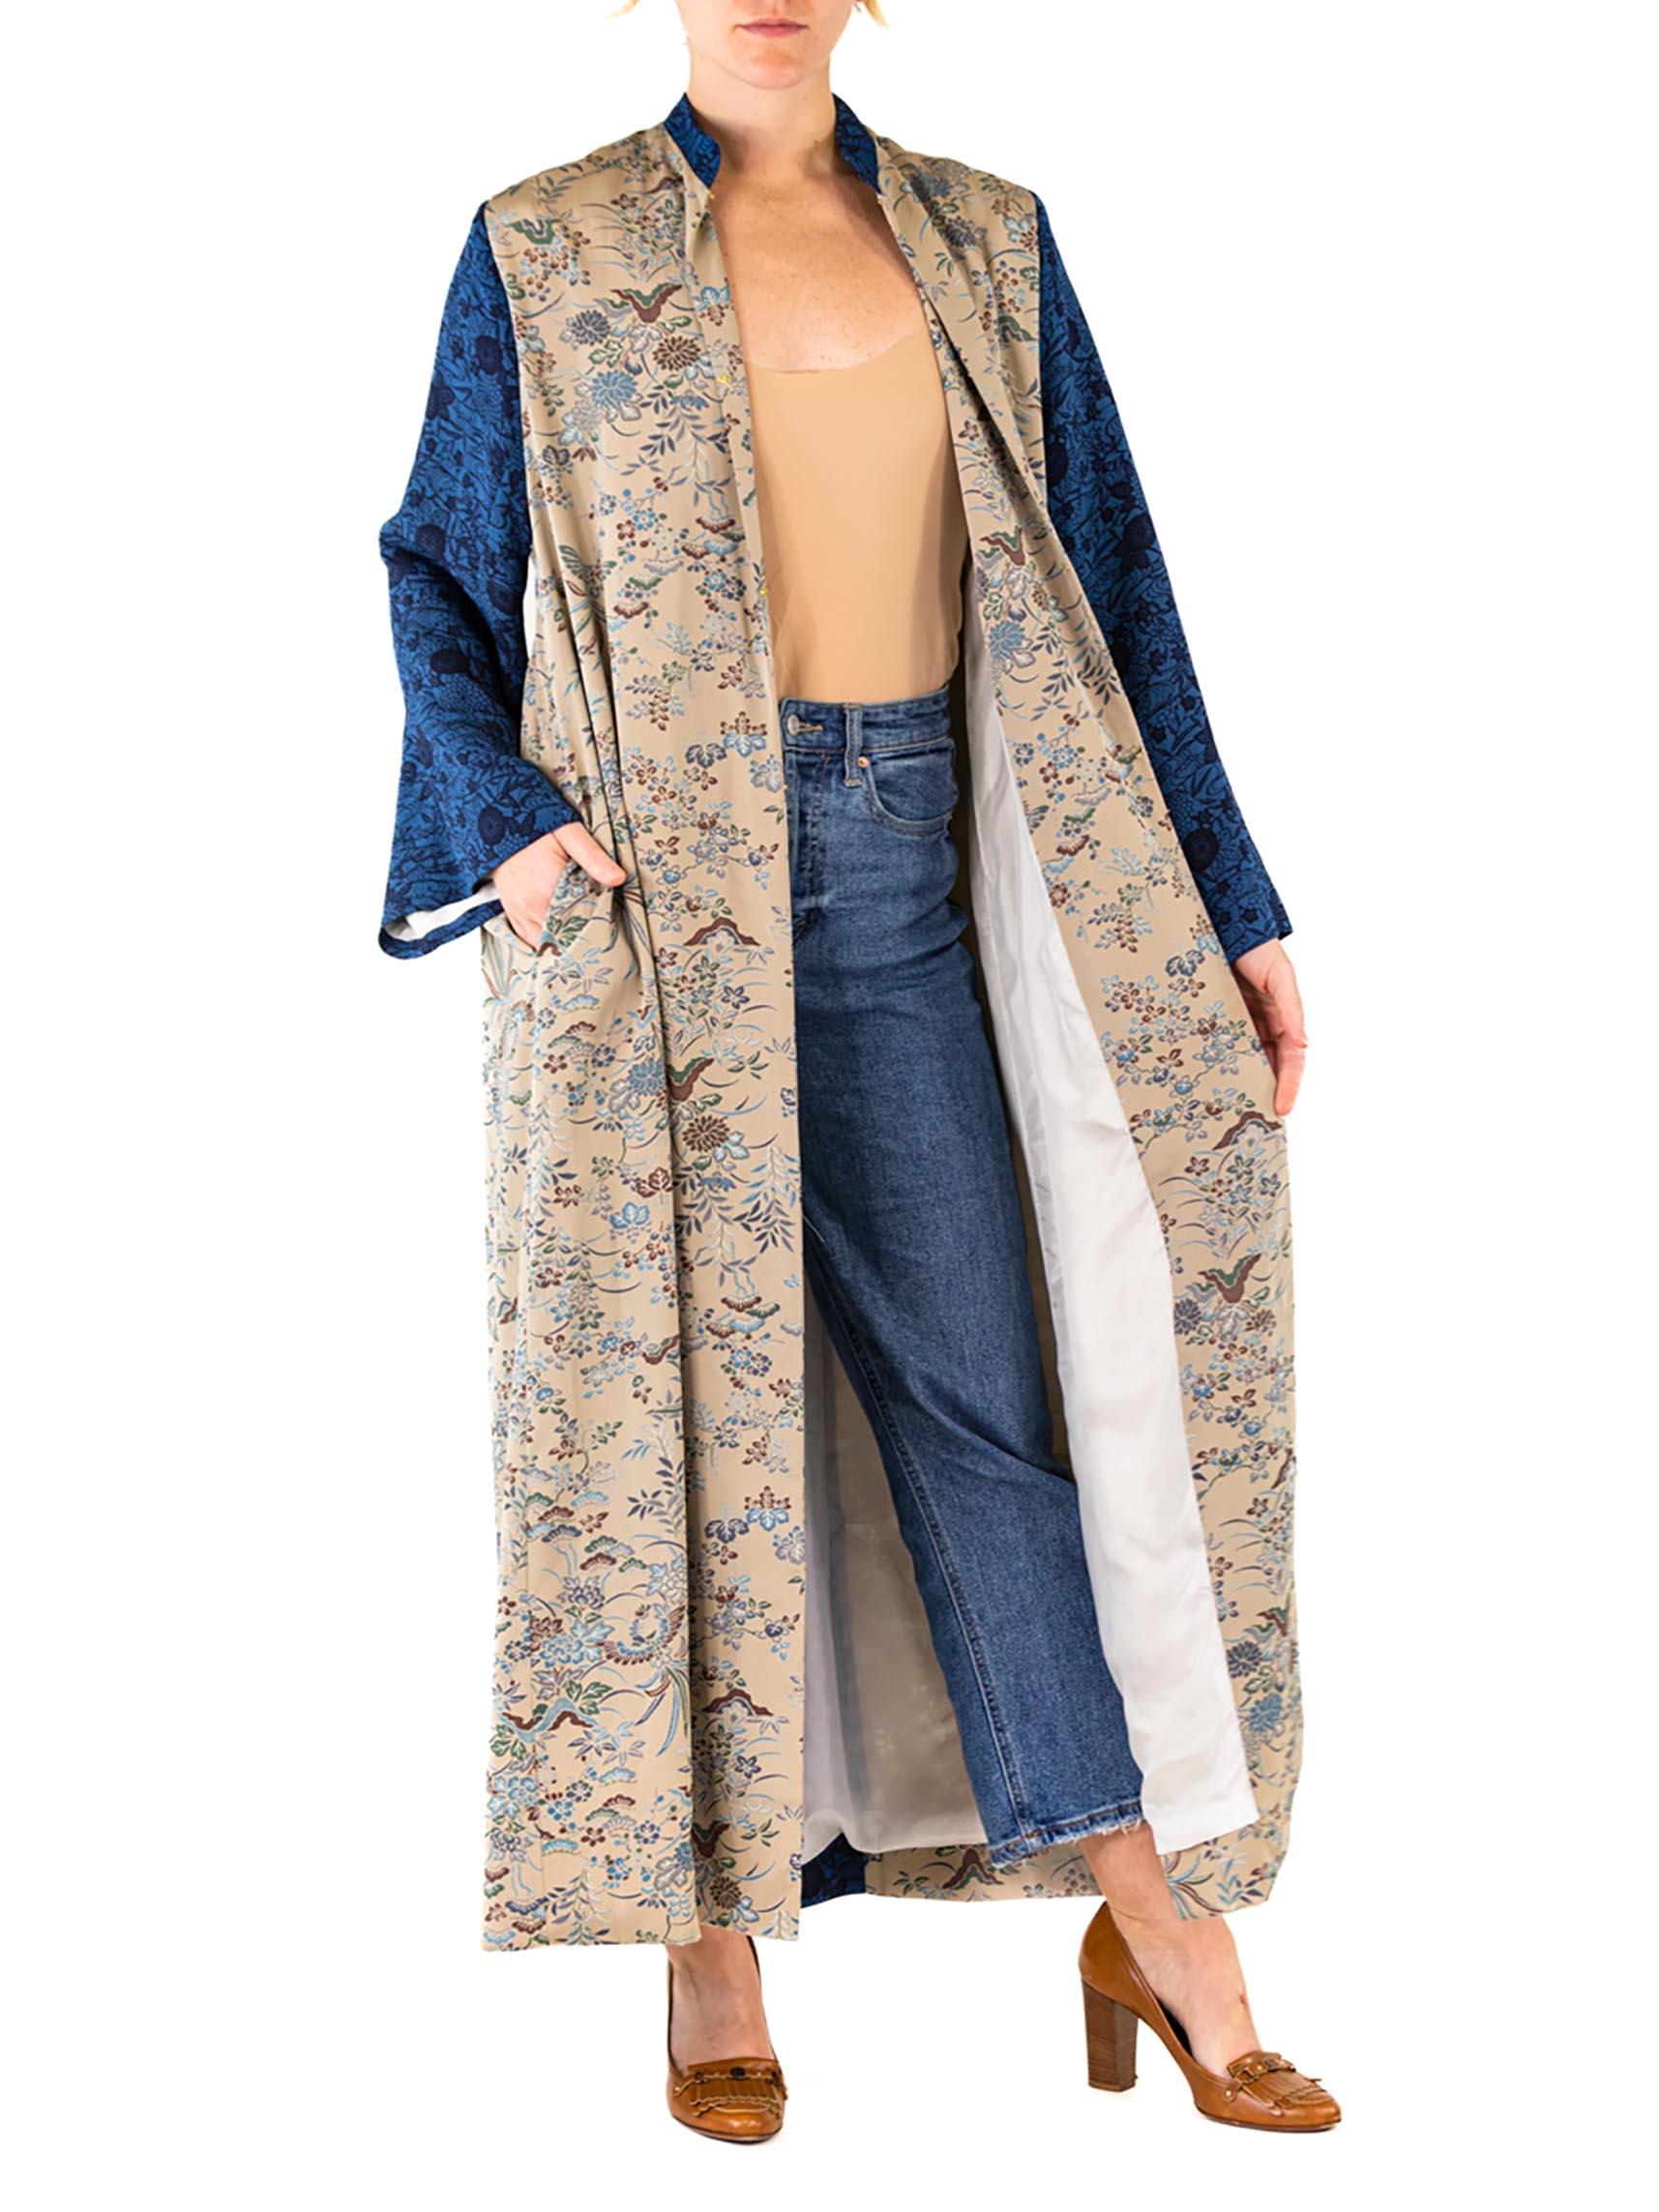 MORPHEW COLLECTION Ecru Japanese Kimono Silk Royal Blue Sleeves Duster In Excellent Condition For Sale In New York, NY